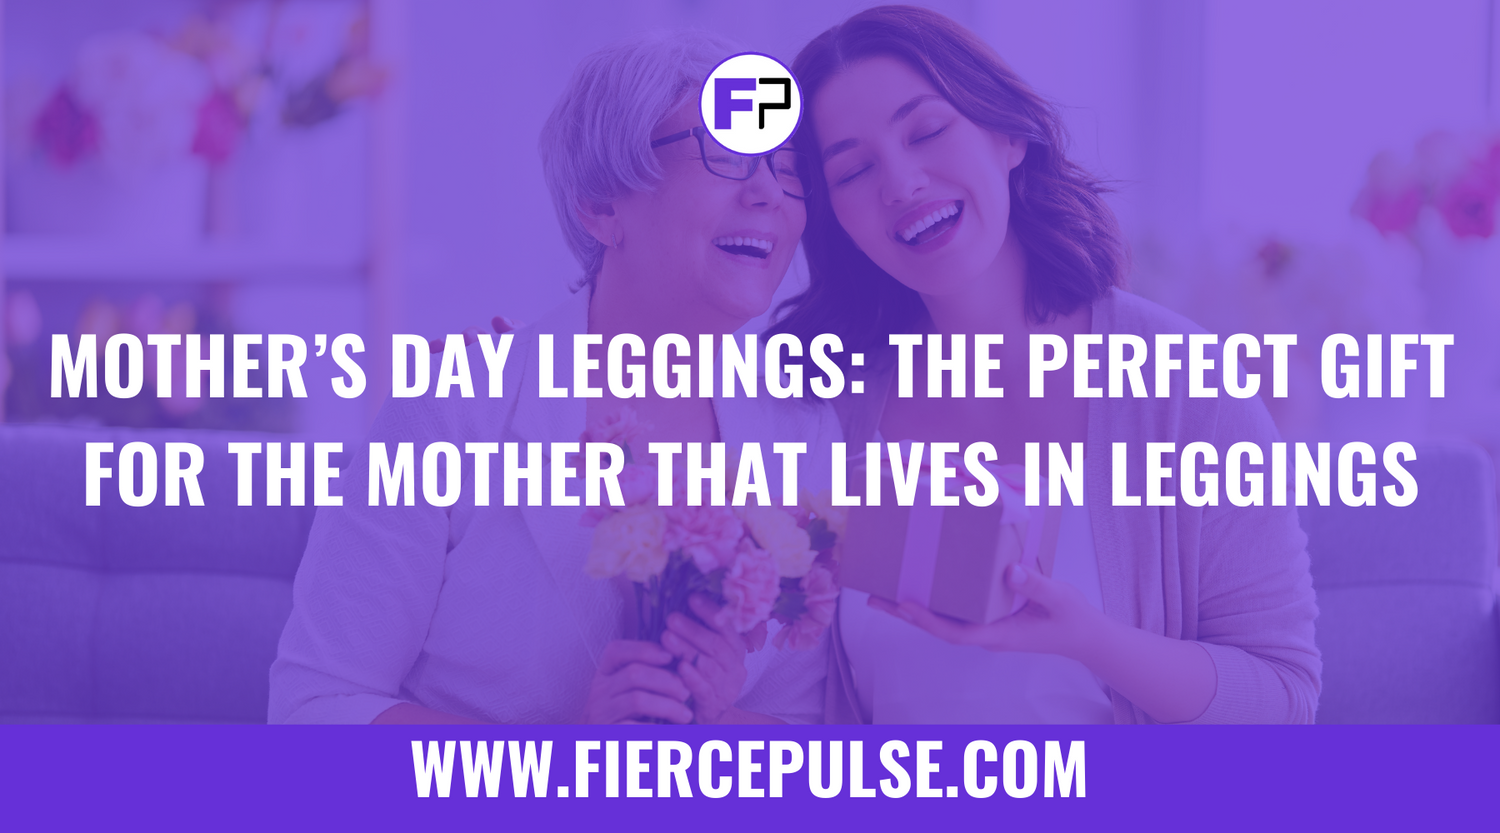 Mother’s Day Leggings: The Perfect Gift for the Mother That Lives in Leggings